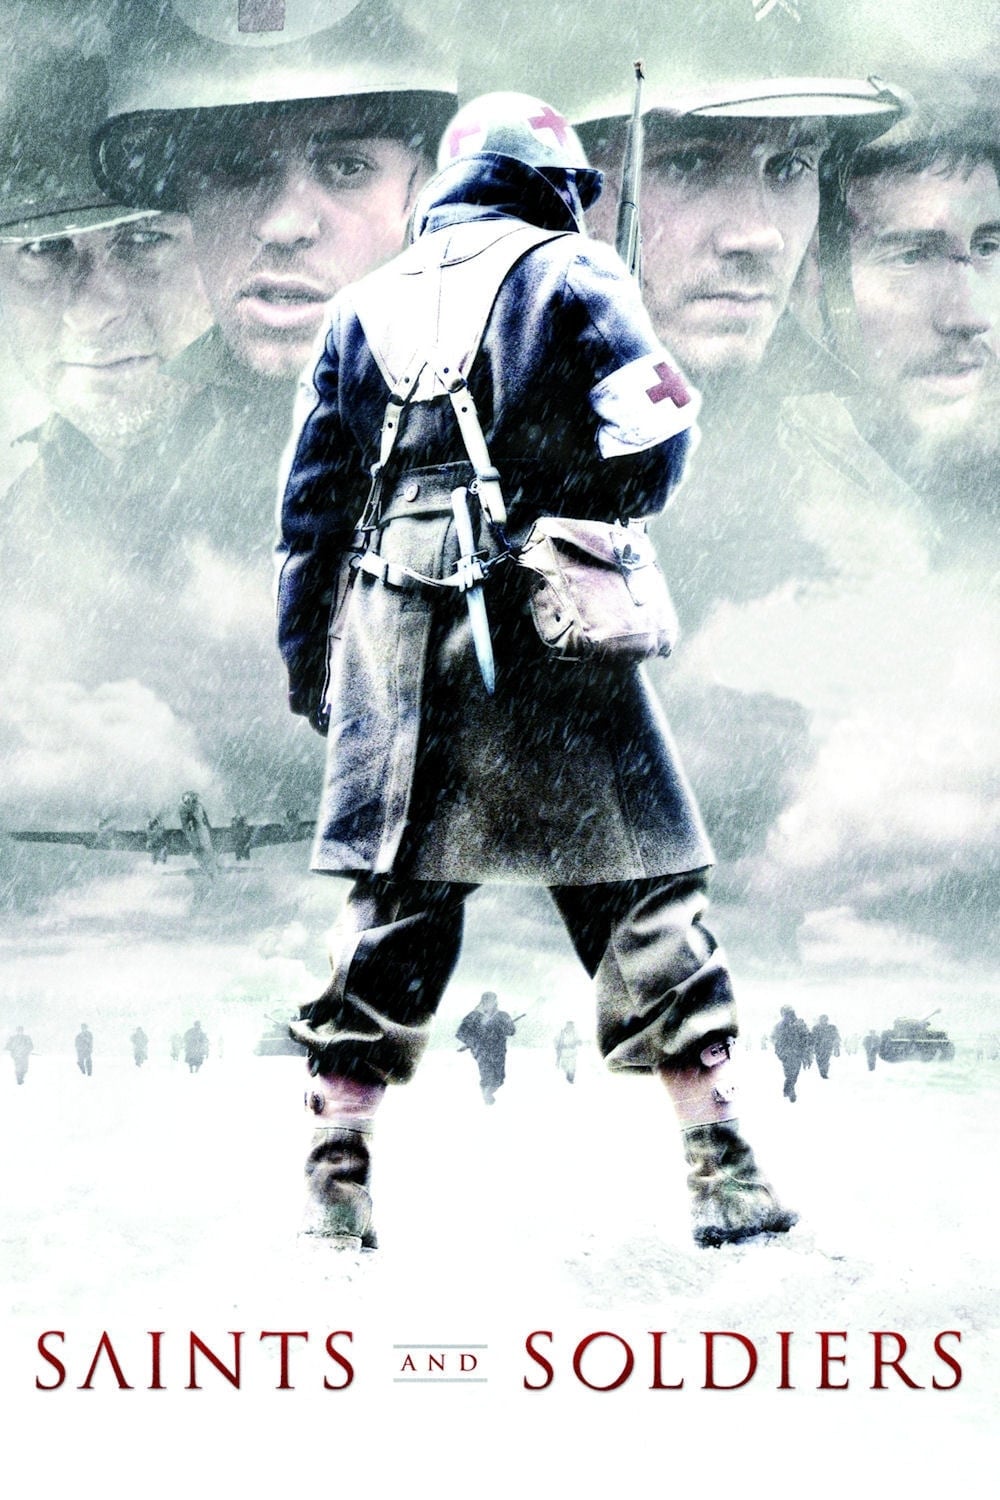 Saints and Soldiers [HD] (2003)